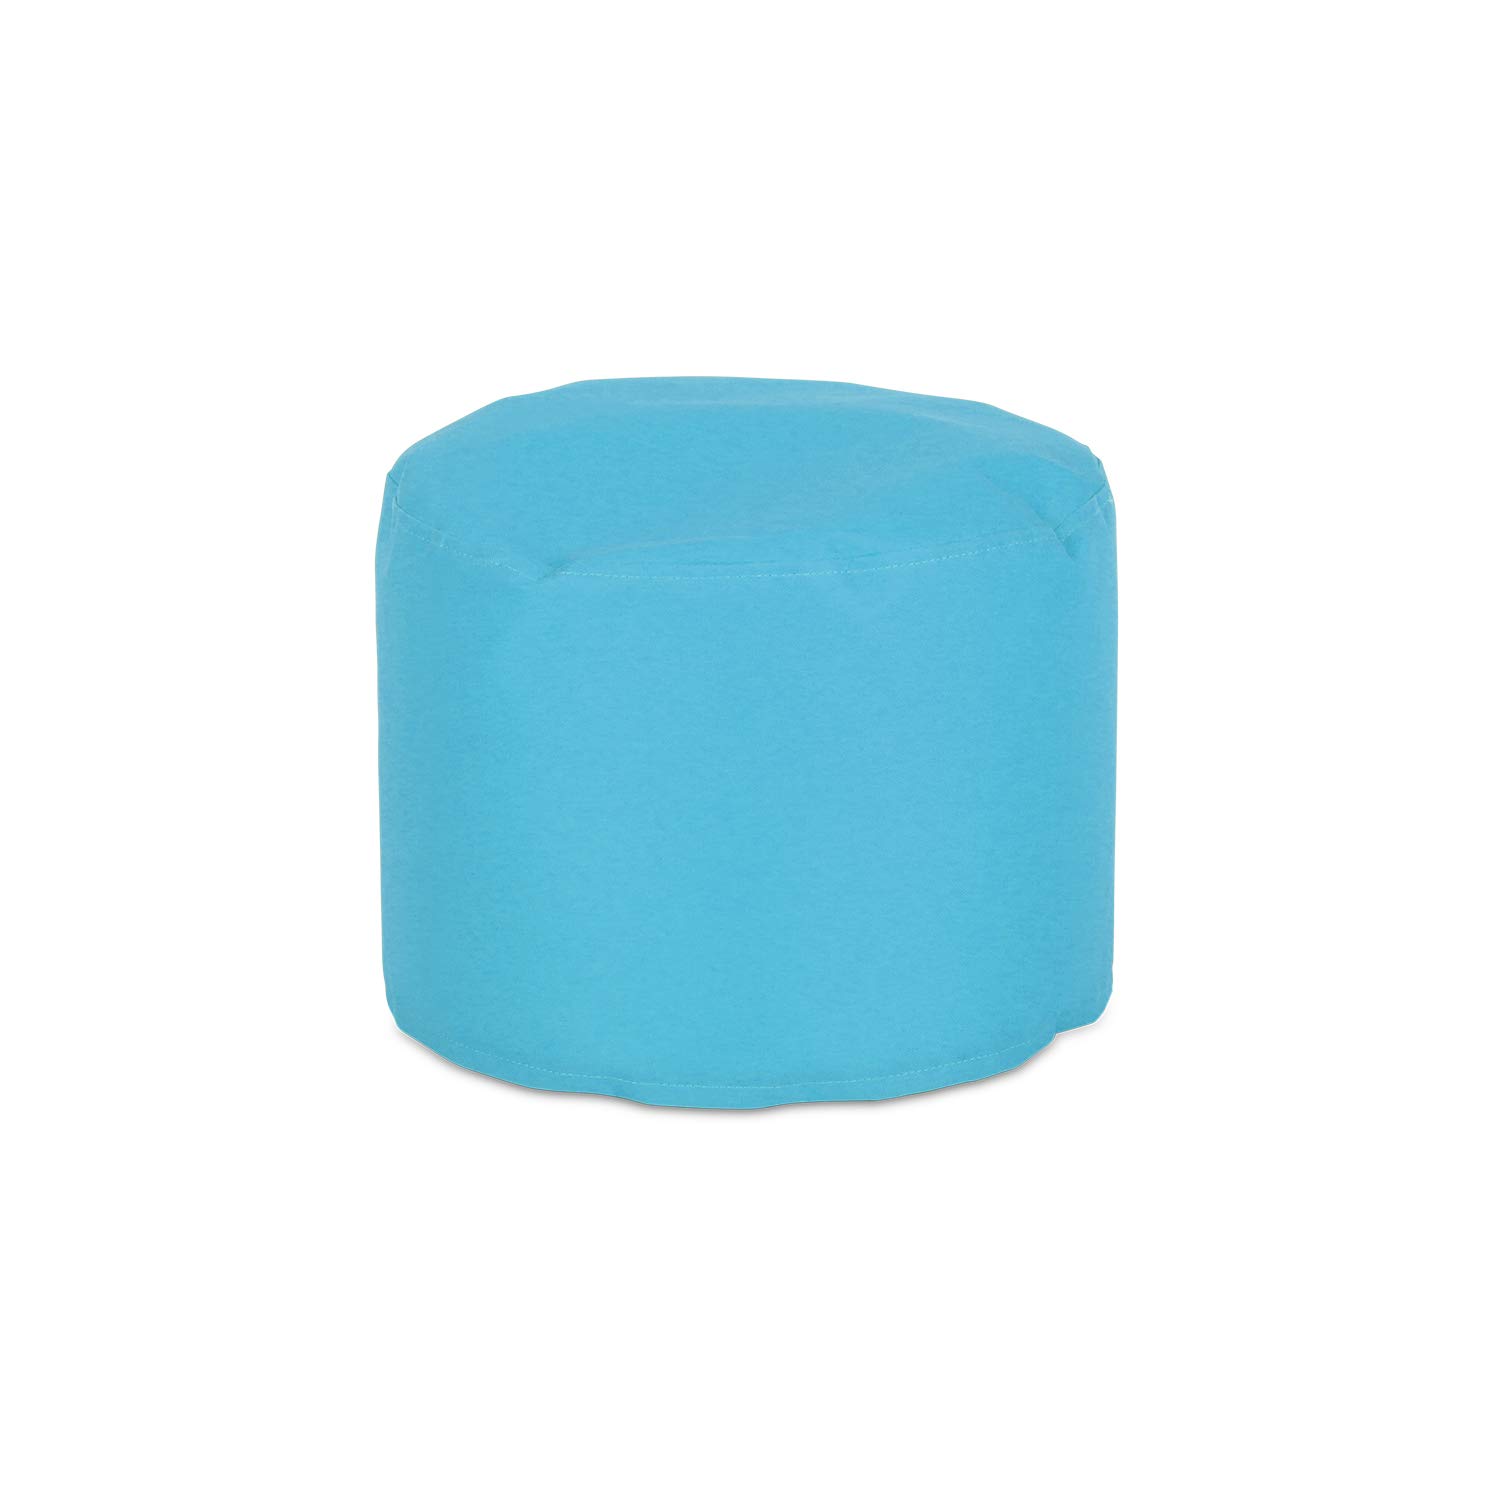 Knorr-Baby 440102 Stool Round M Colour Petrol Blue